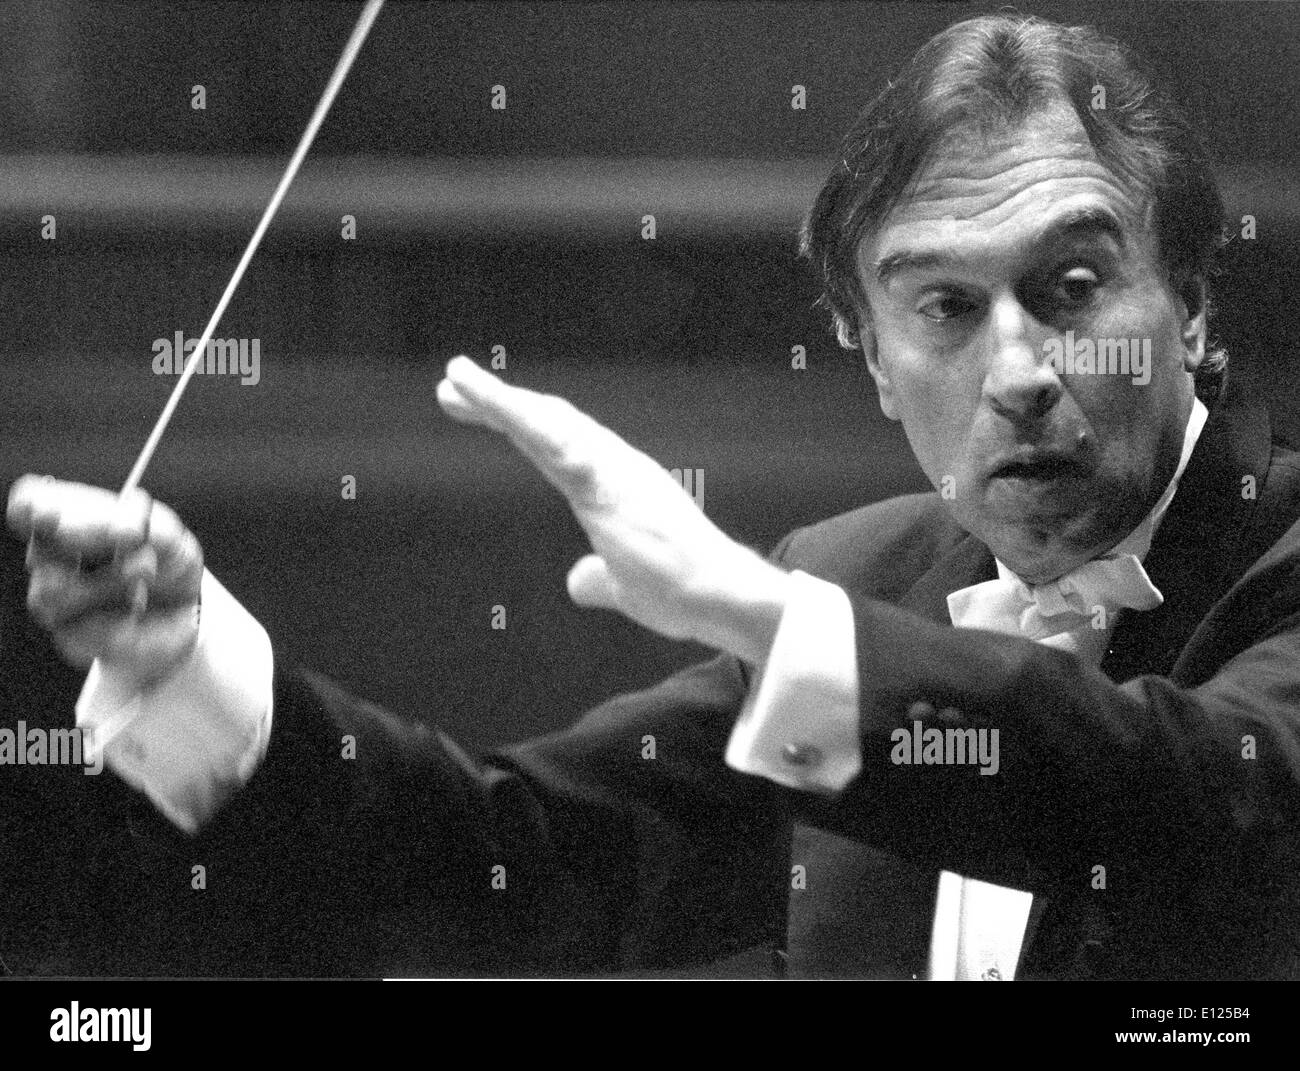 Sep 06, 1991; Lucerne, Switzerland; CLAUDIO ABBADO, conductor of Berliner Philarmonic Orchestra, during a concert at the Kunsthaus Lucerne in Switzerland. (Credit Image: KEYSTONE Pictures USA/ZUMAPRESS.com) Stock Photo